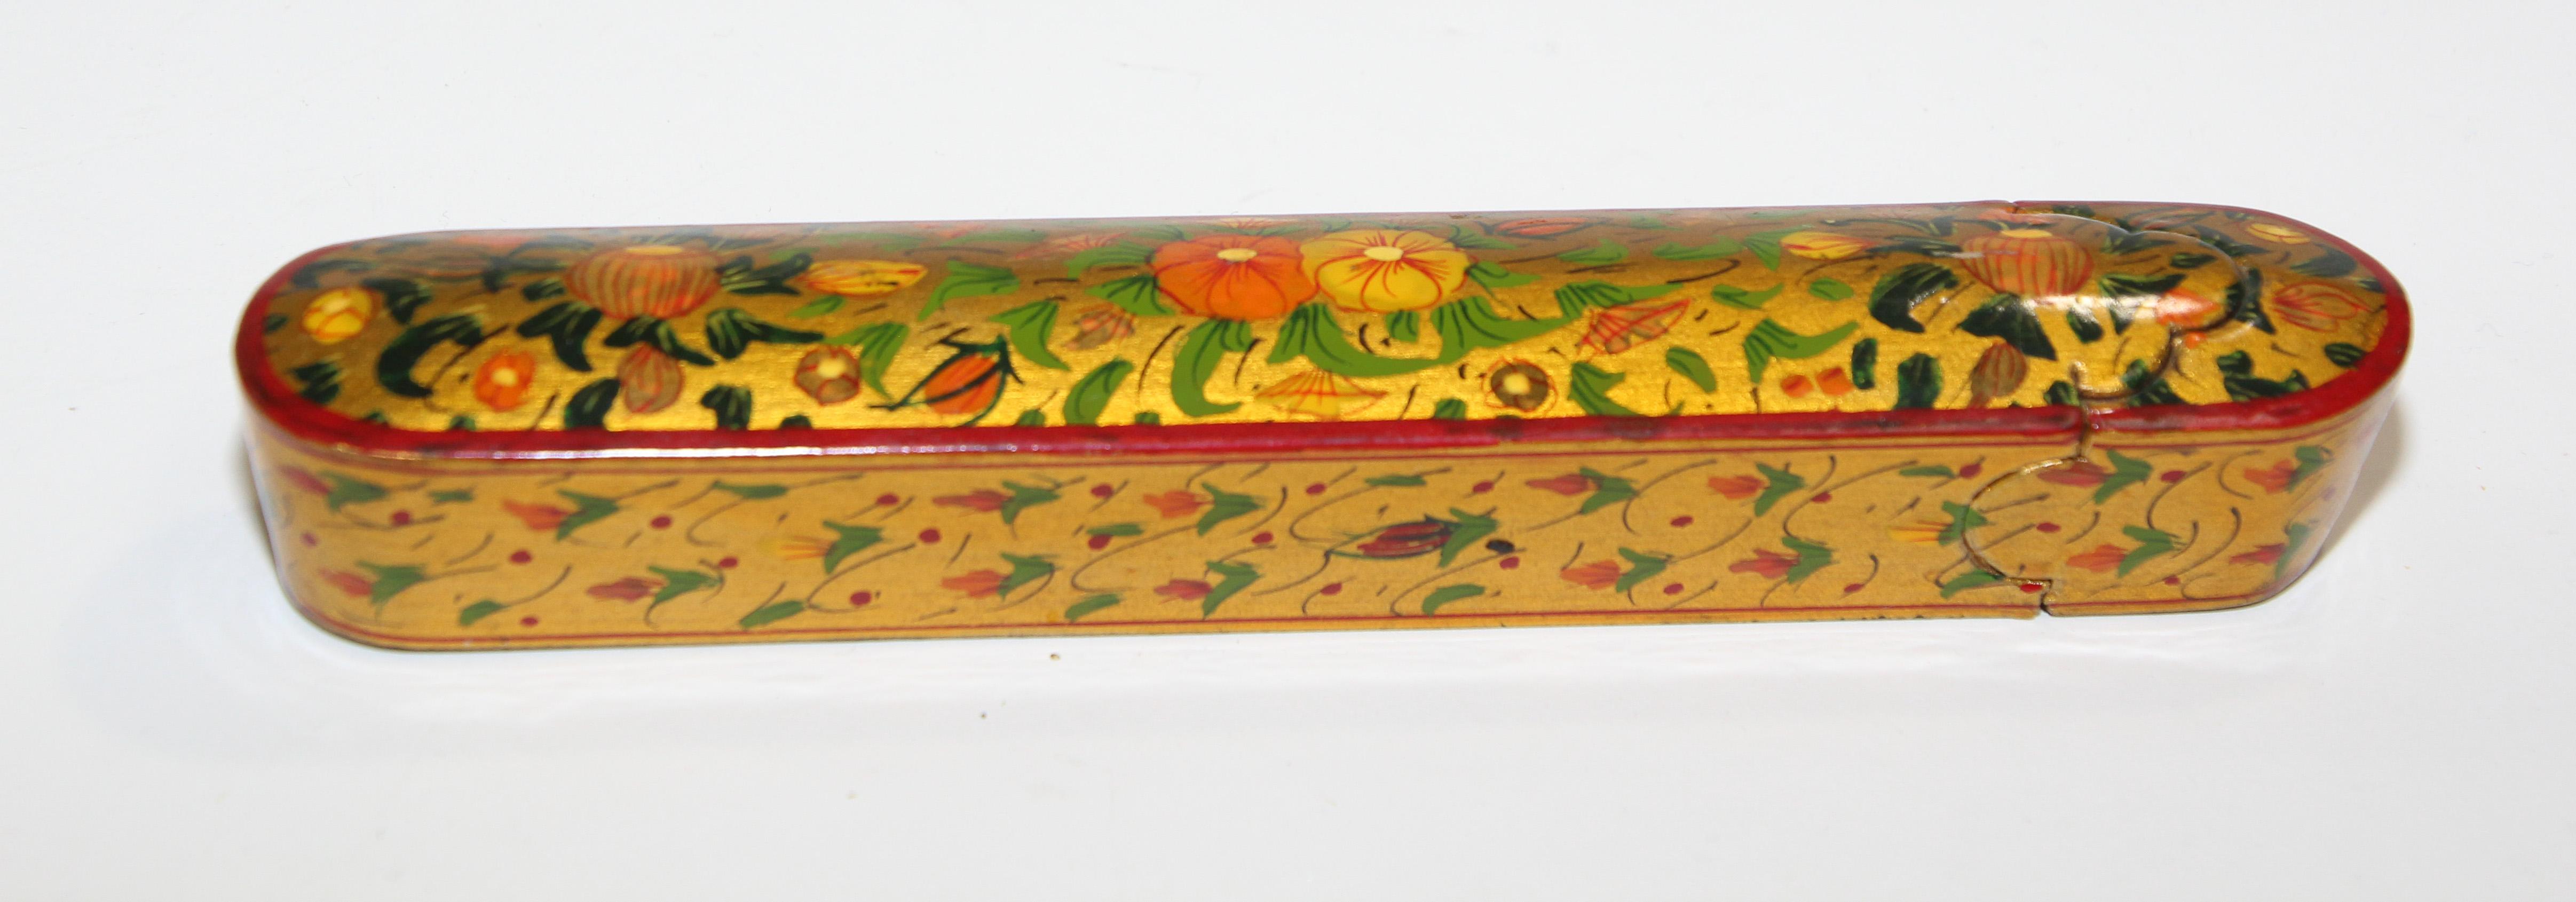 Indian Persian Lacquer Pen Box Hand Painted with Floral and Gilt Design For Sale